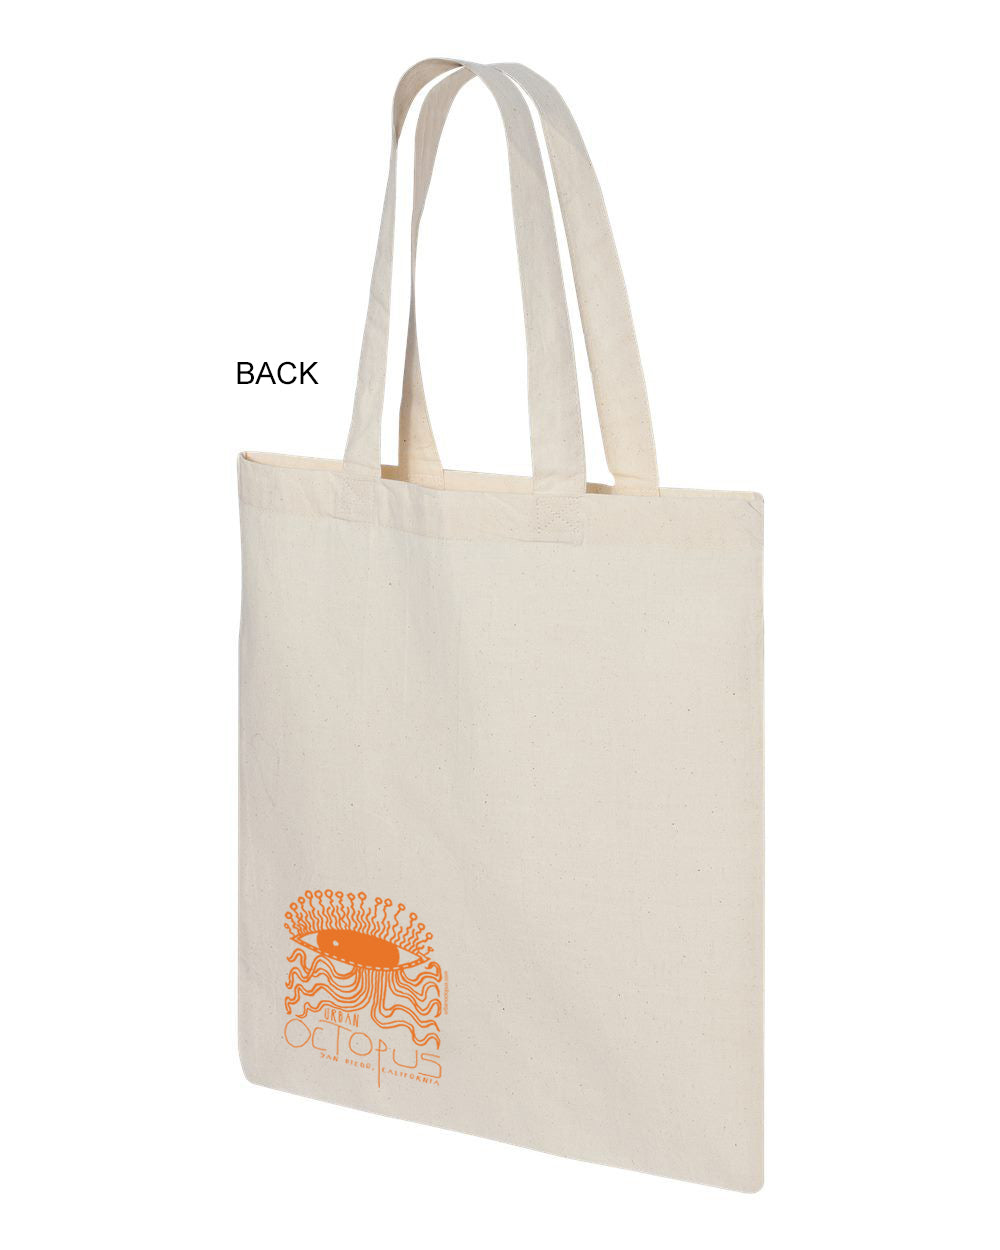 "Alternative Thing" Tote canvas bag